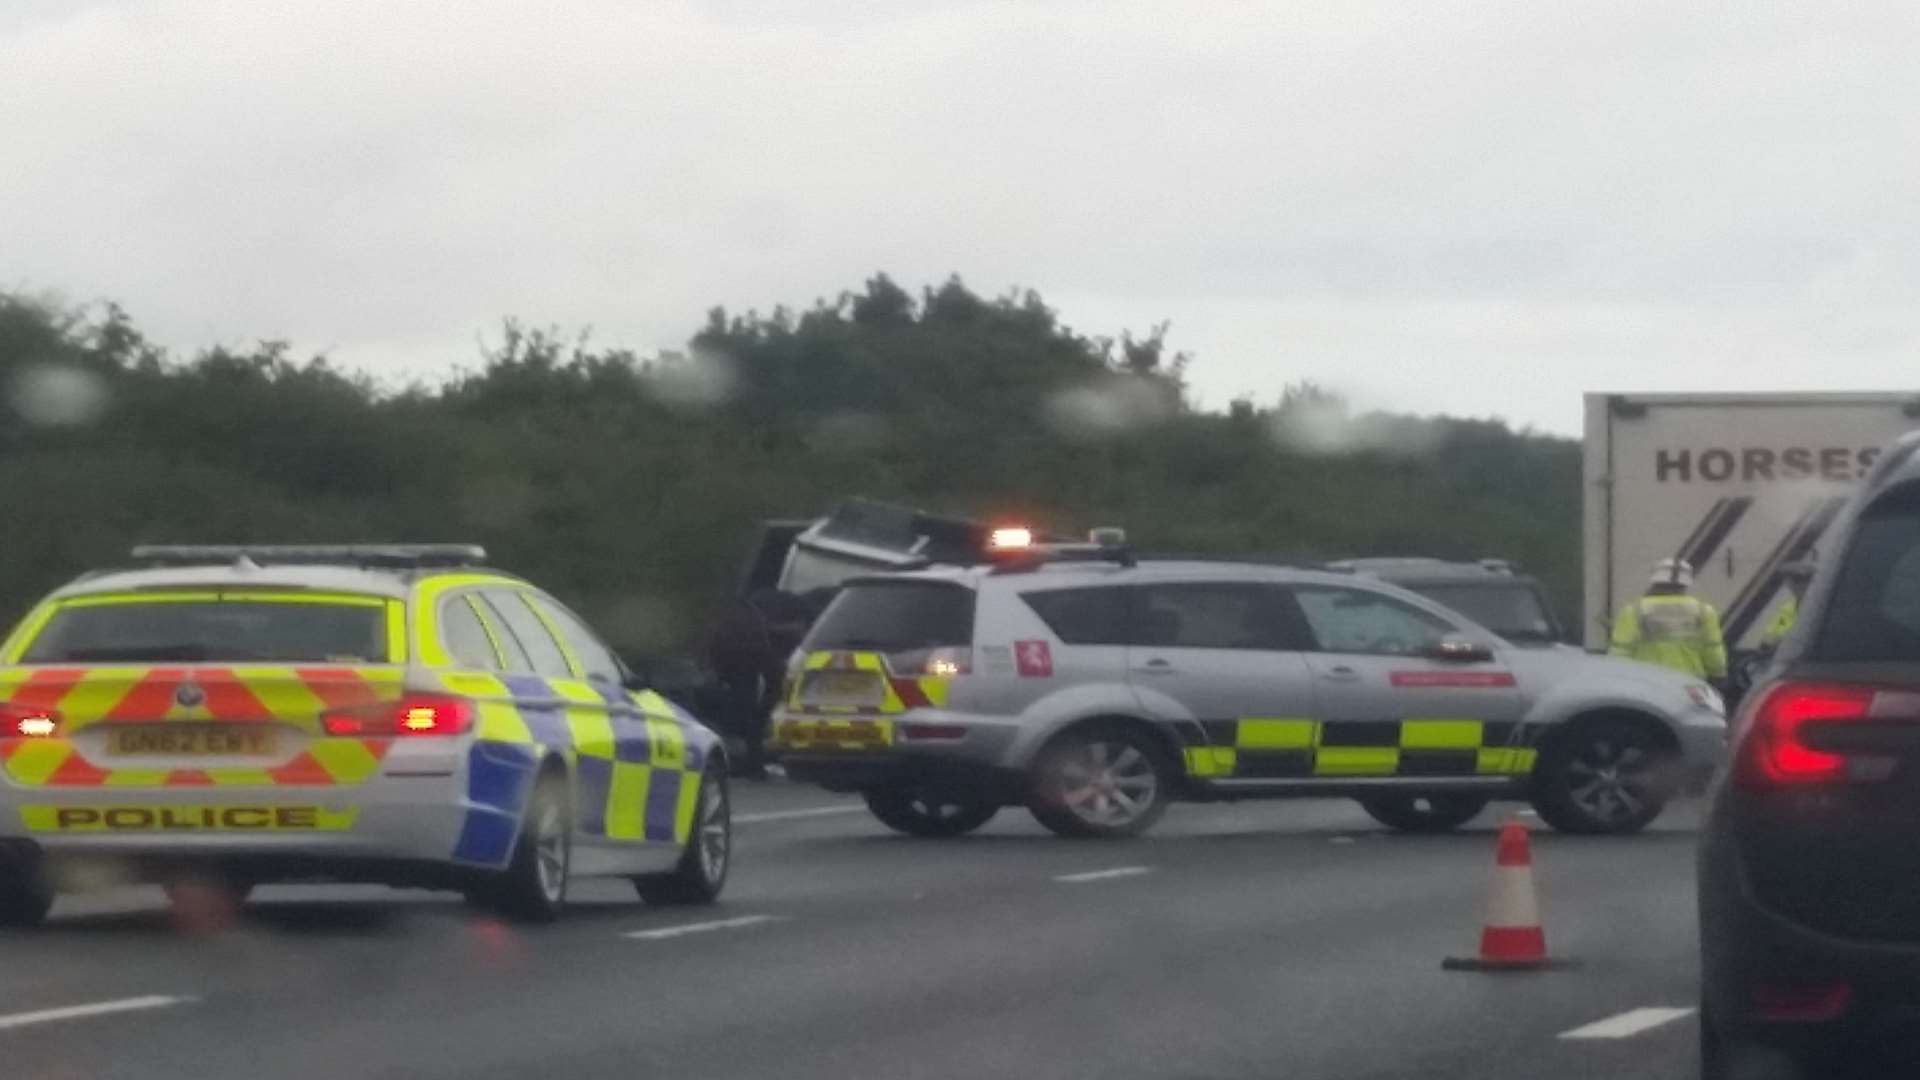 Emergency services at the scene of the accident on the M20 near Ashford this morning